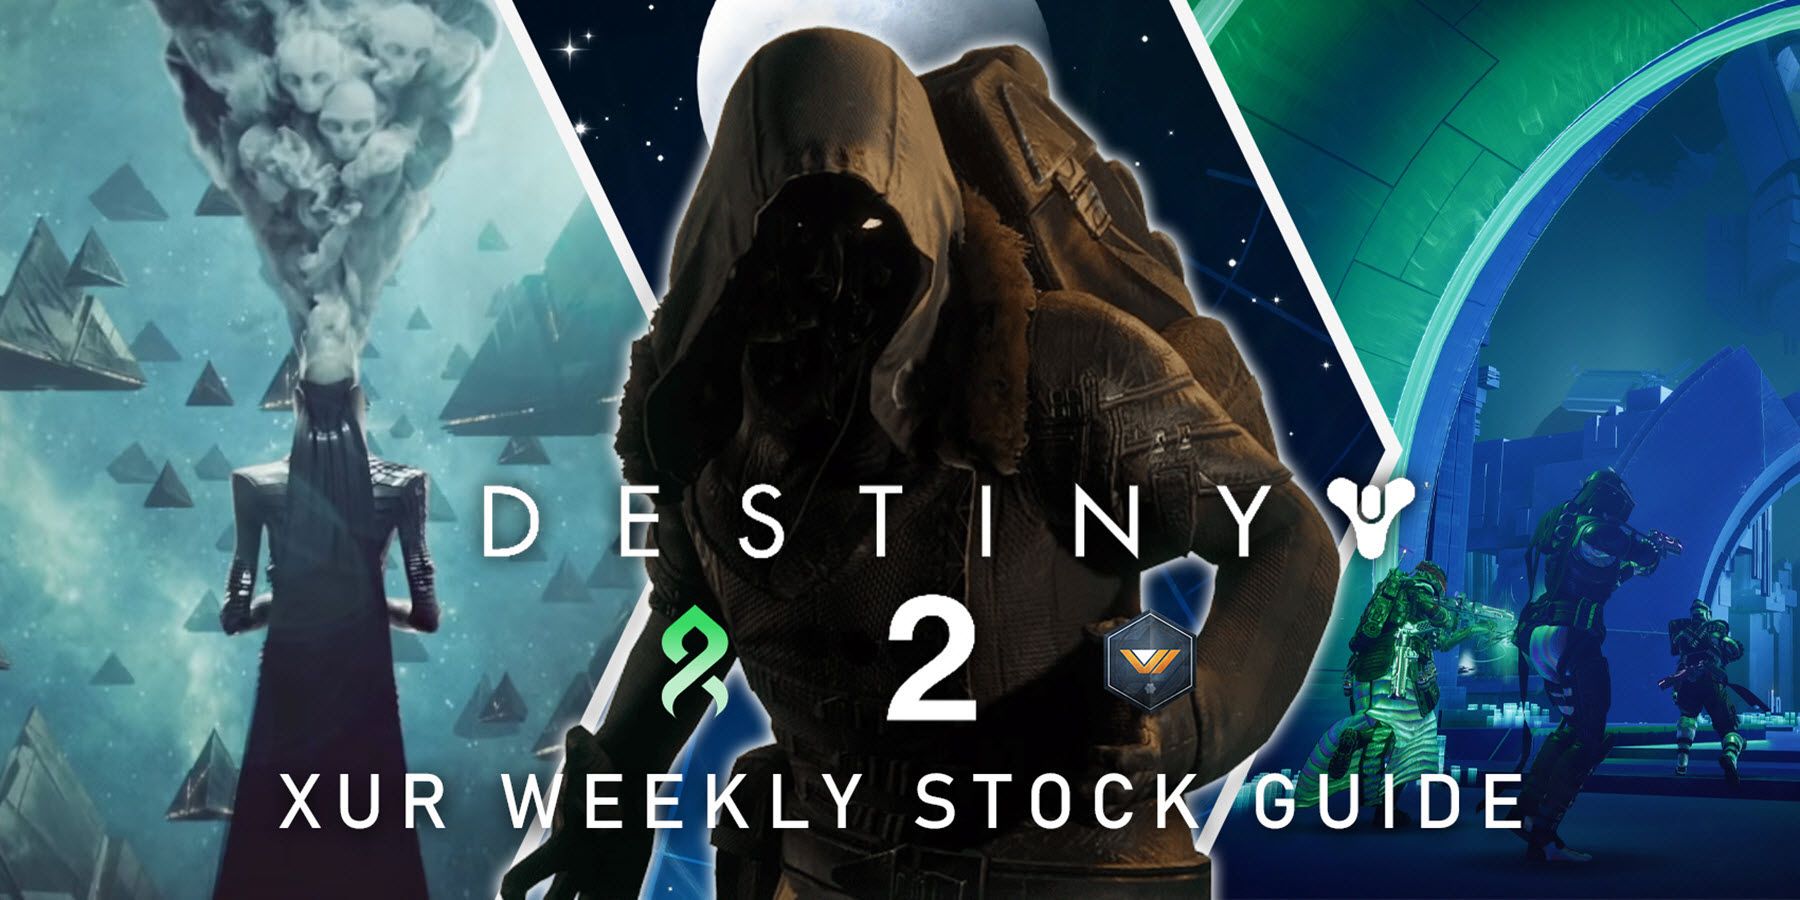 amazon, destiny 2: xur exotic armor, weapon, and recommendations for may 3